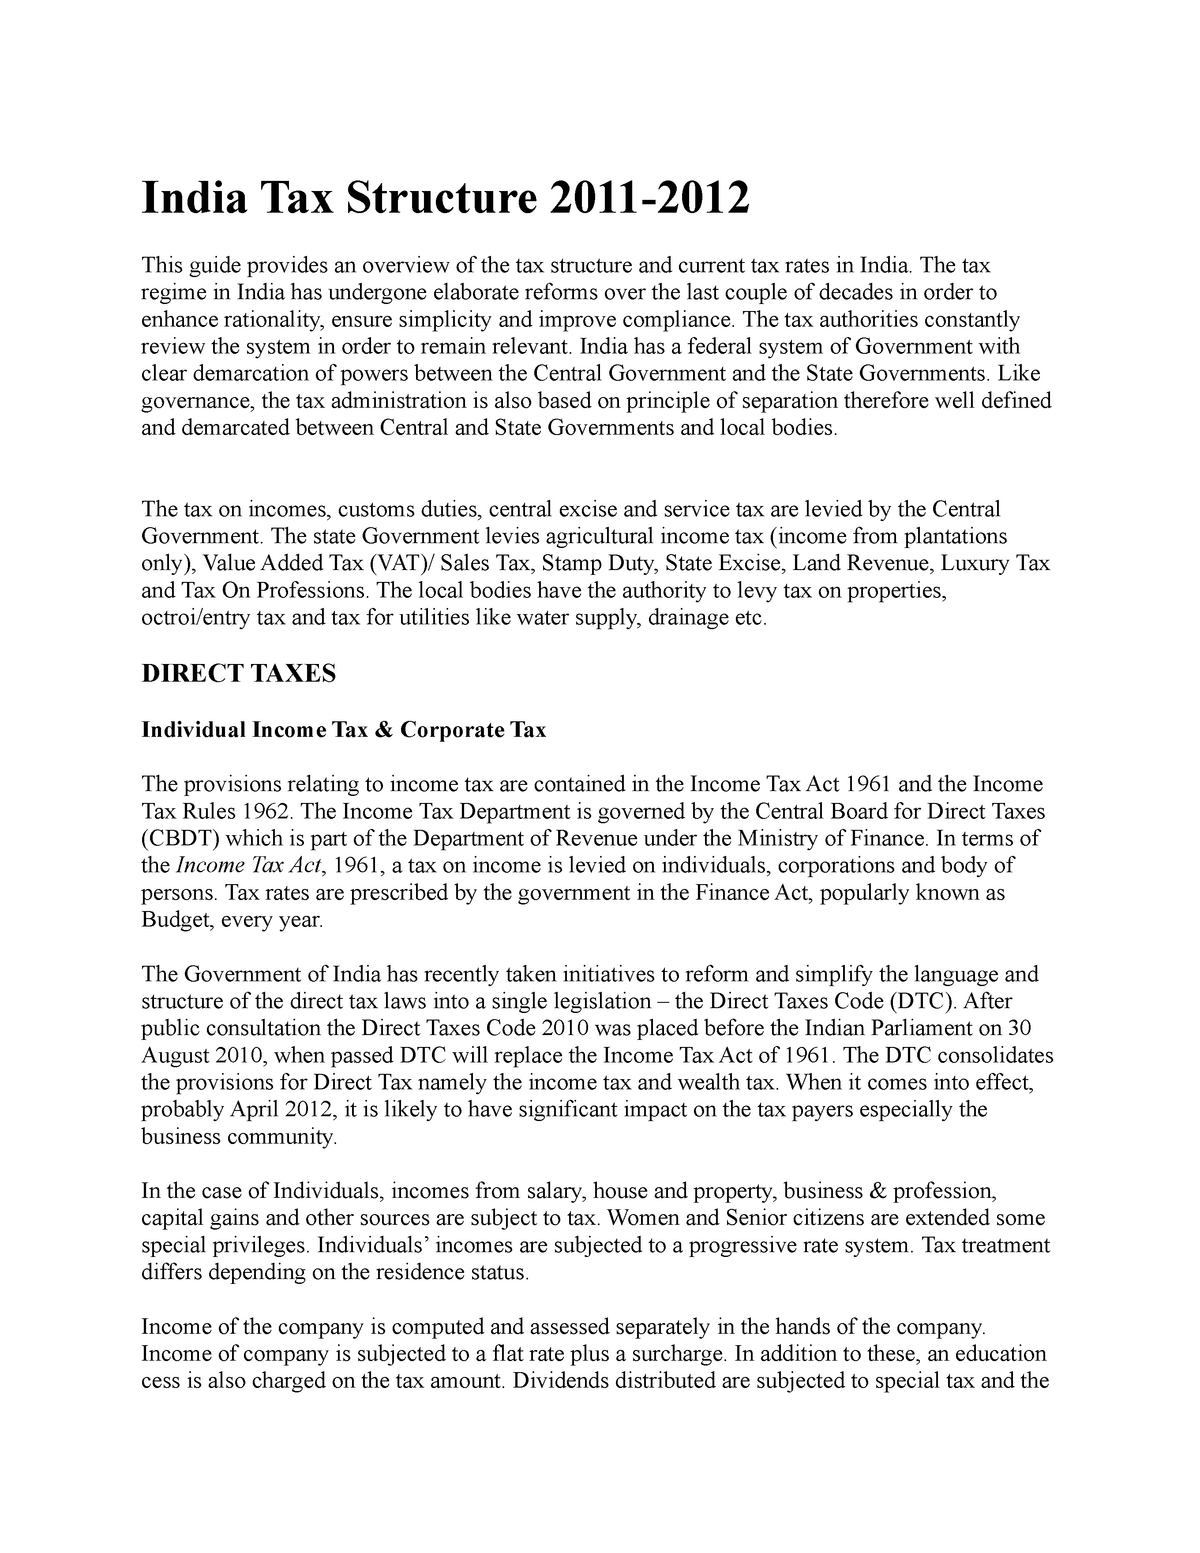 tax-lecture-notes-11-india-tax-structure-2011-this-guide-provides